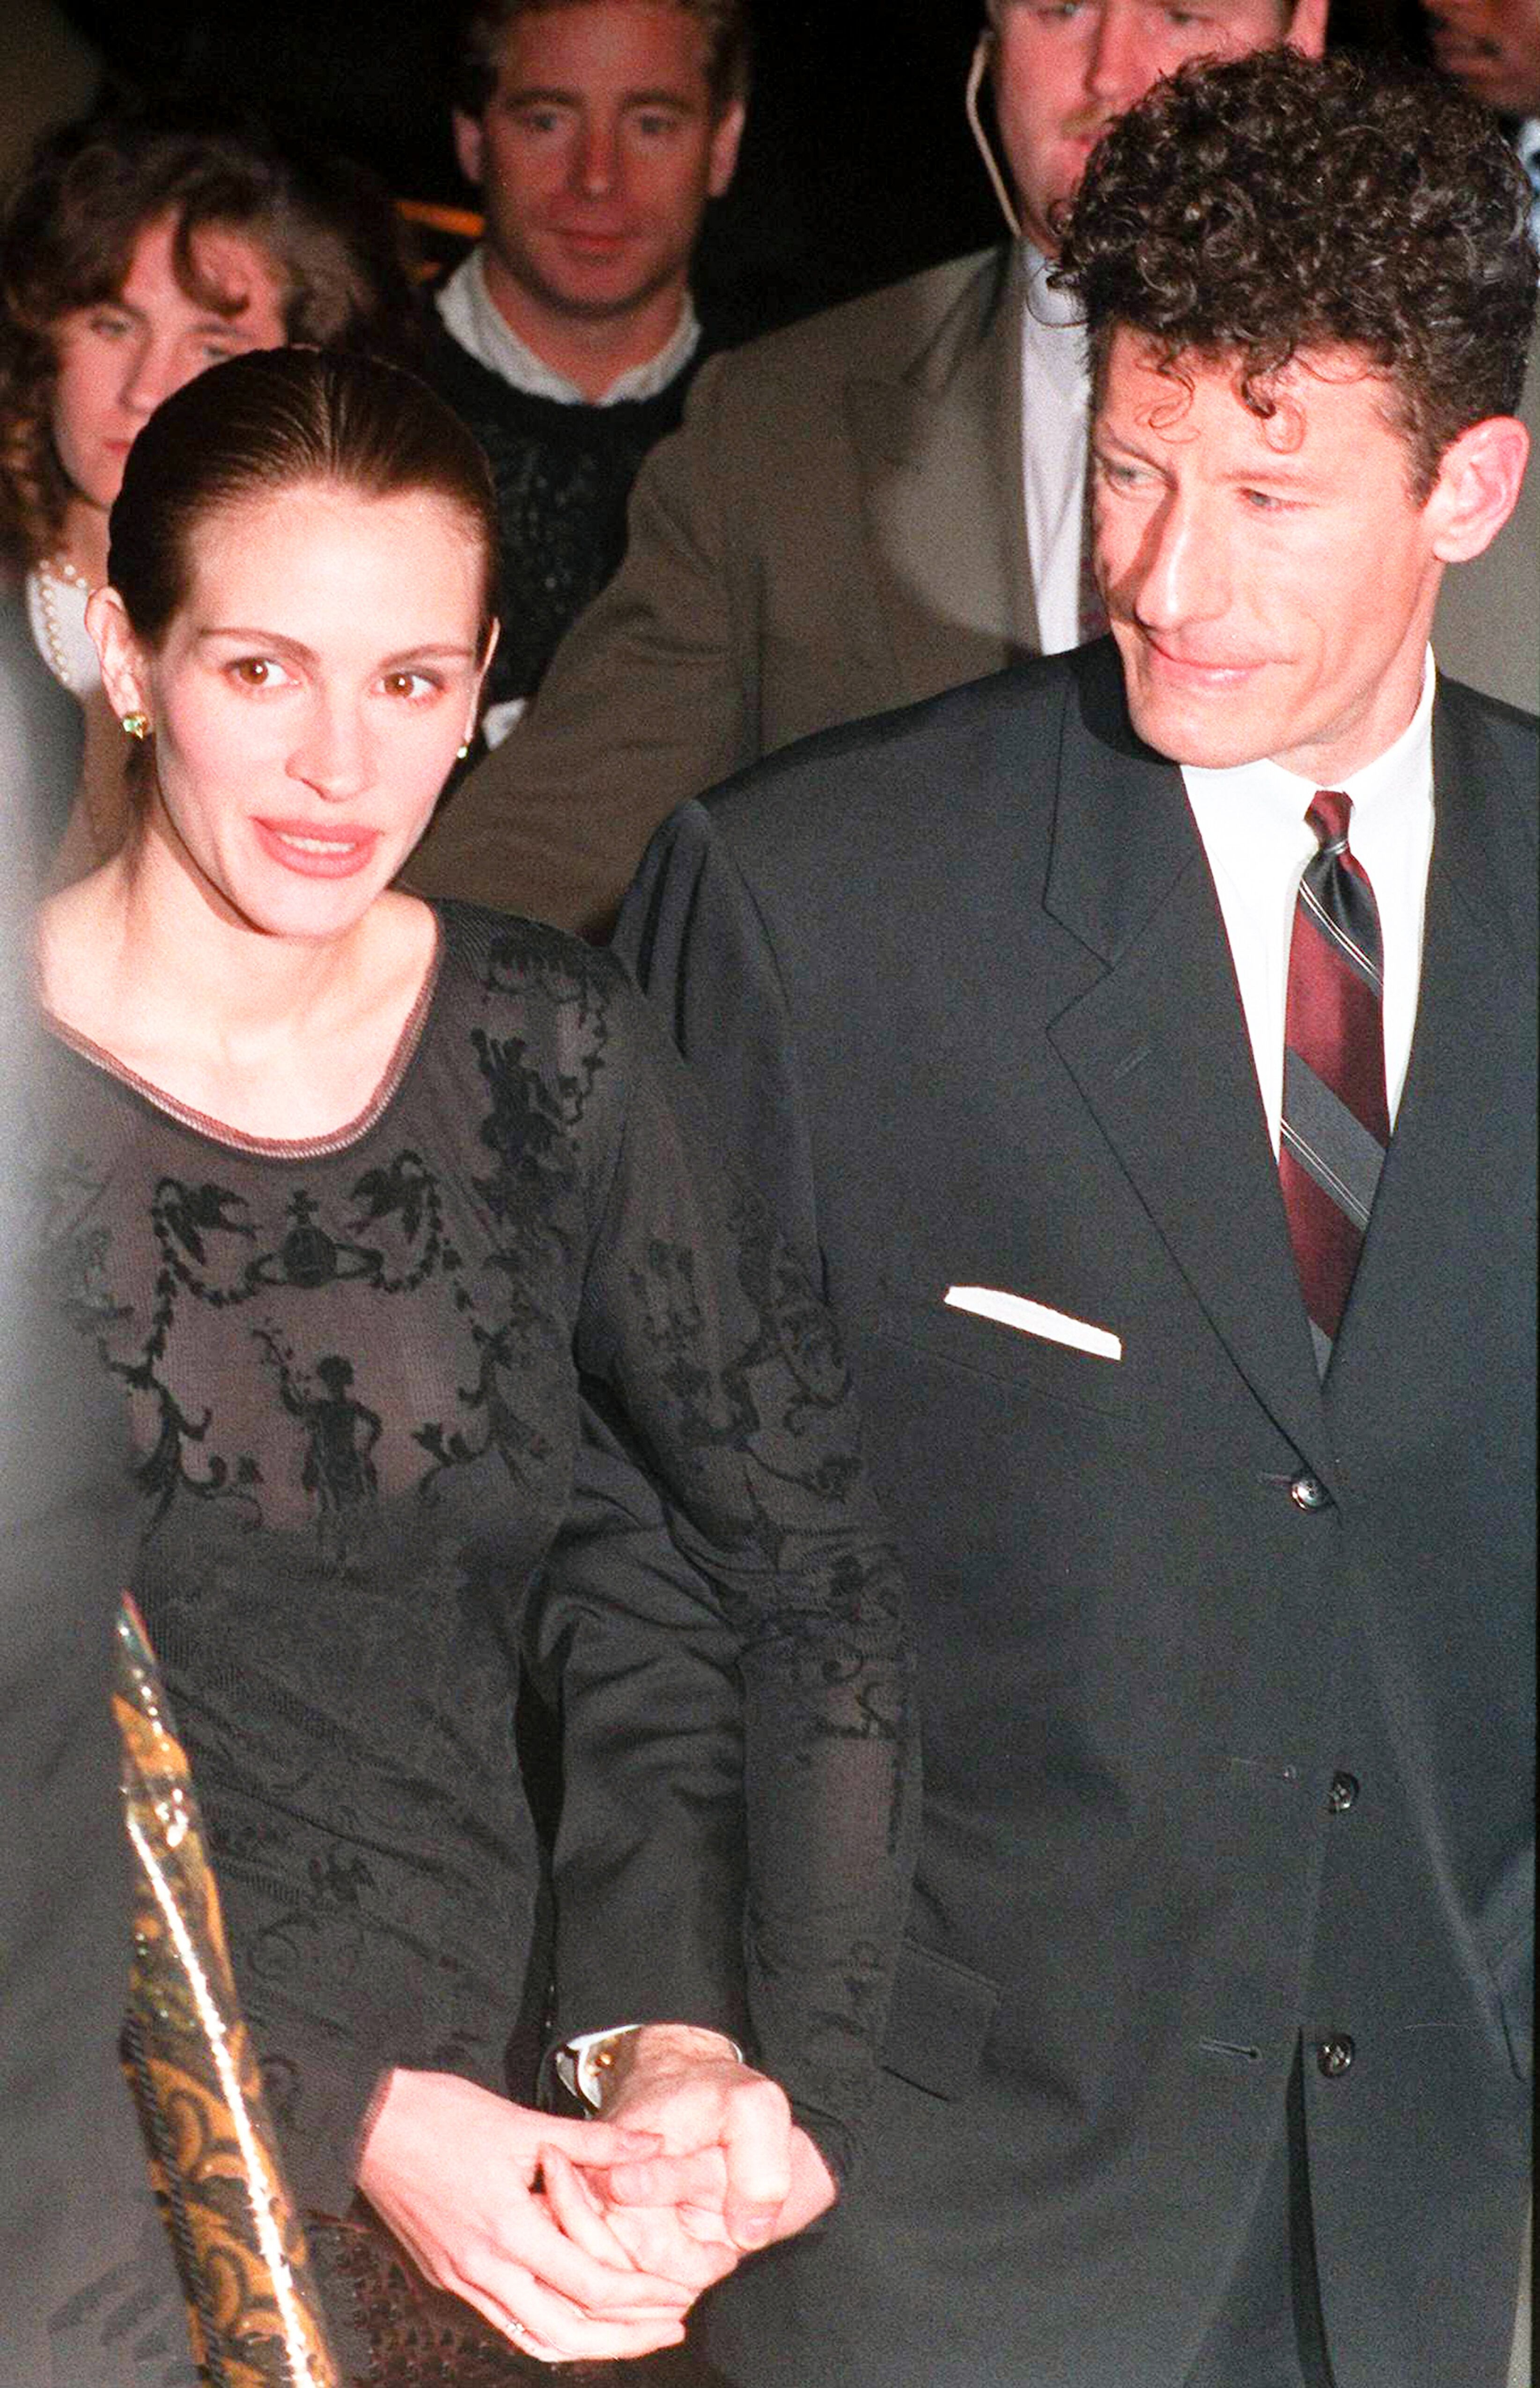 American actress Julia Roberts with her husband, country singer and songwriter Lyle Lovett, circa 1993. | Source: Getty Images